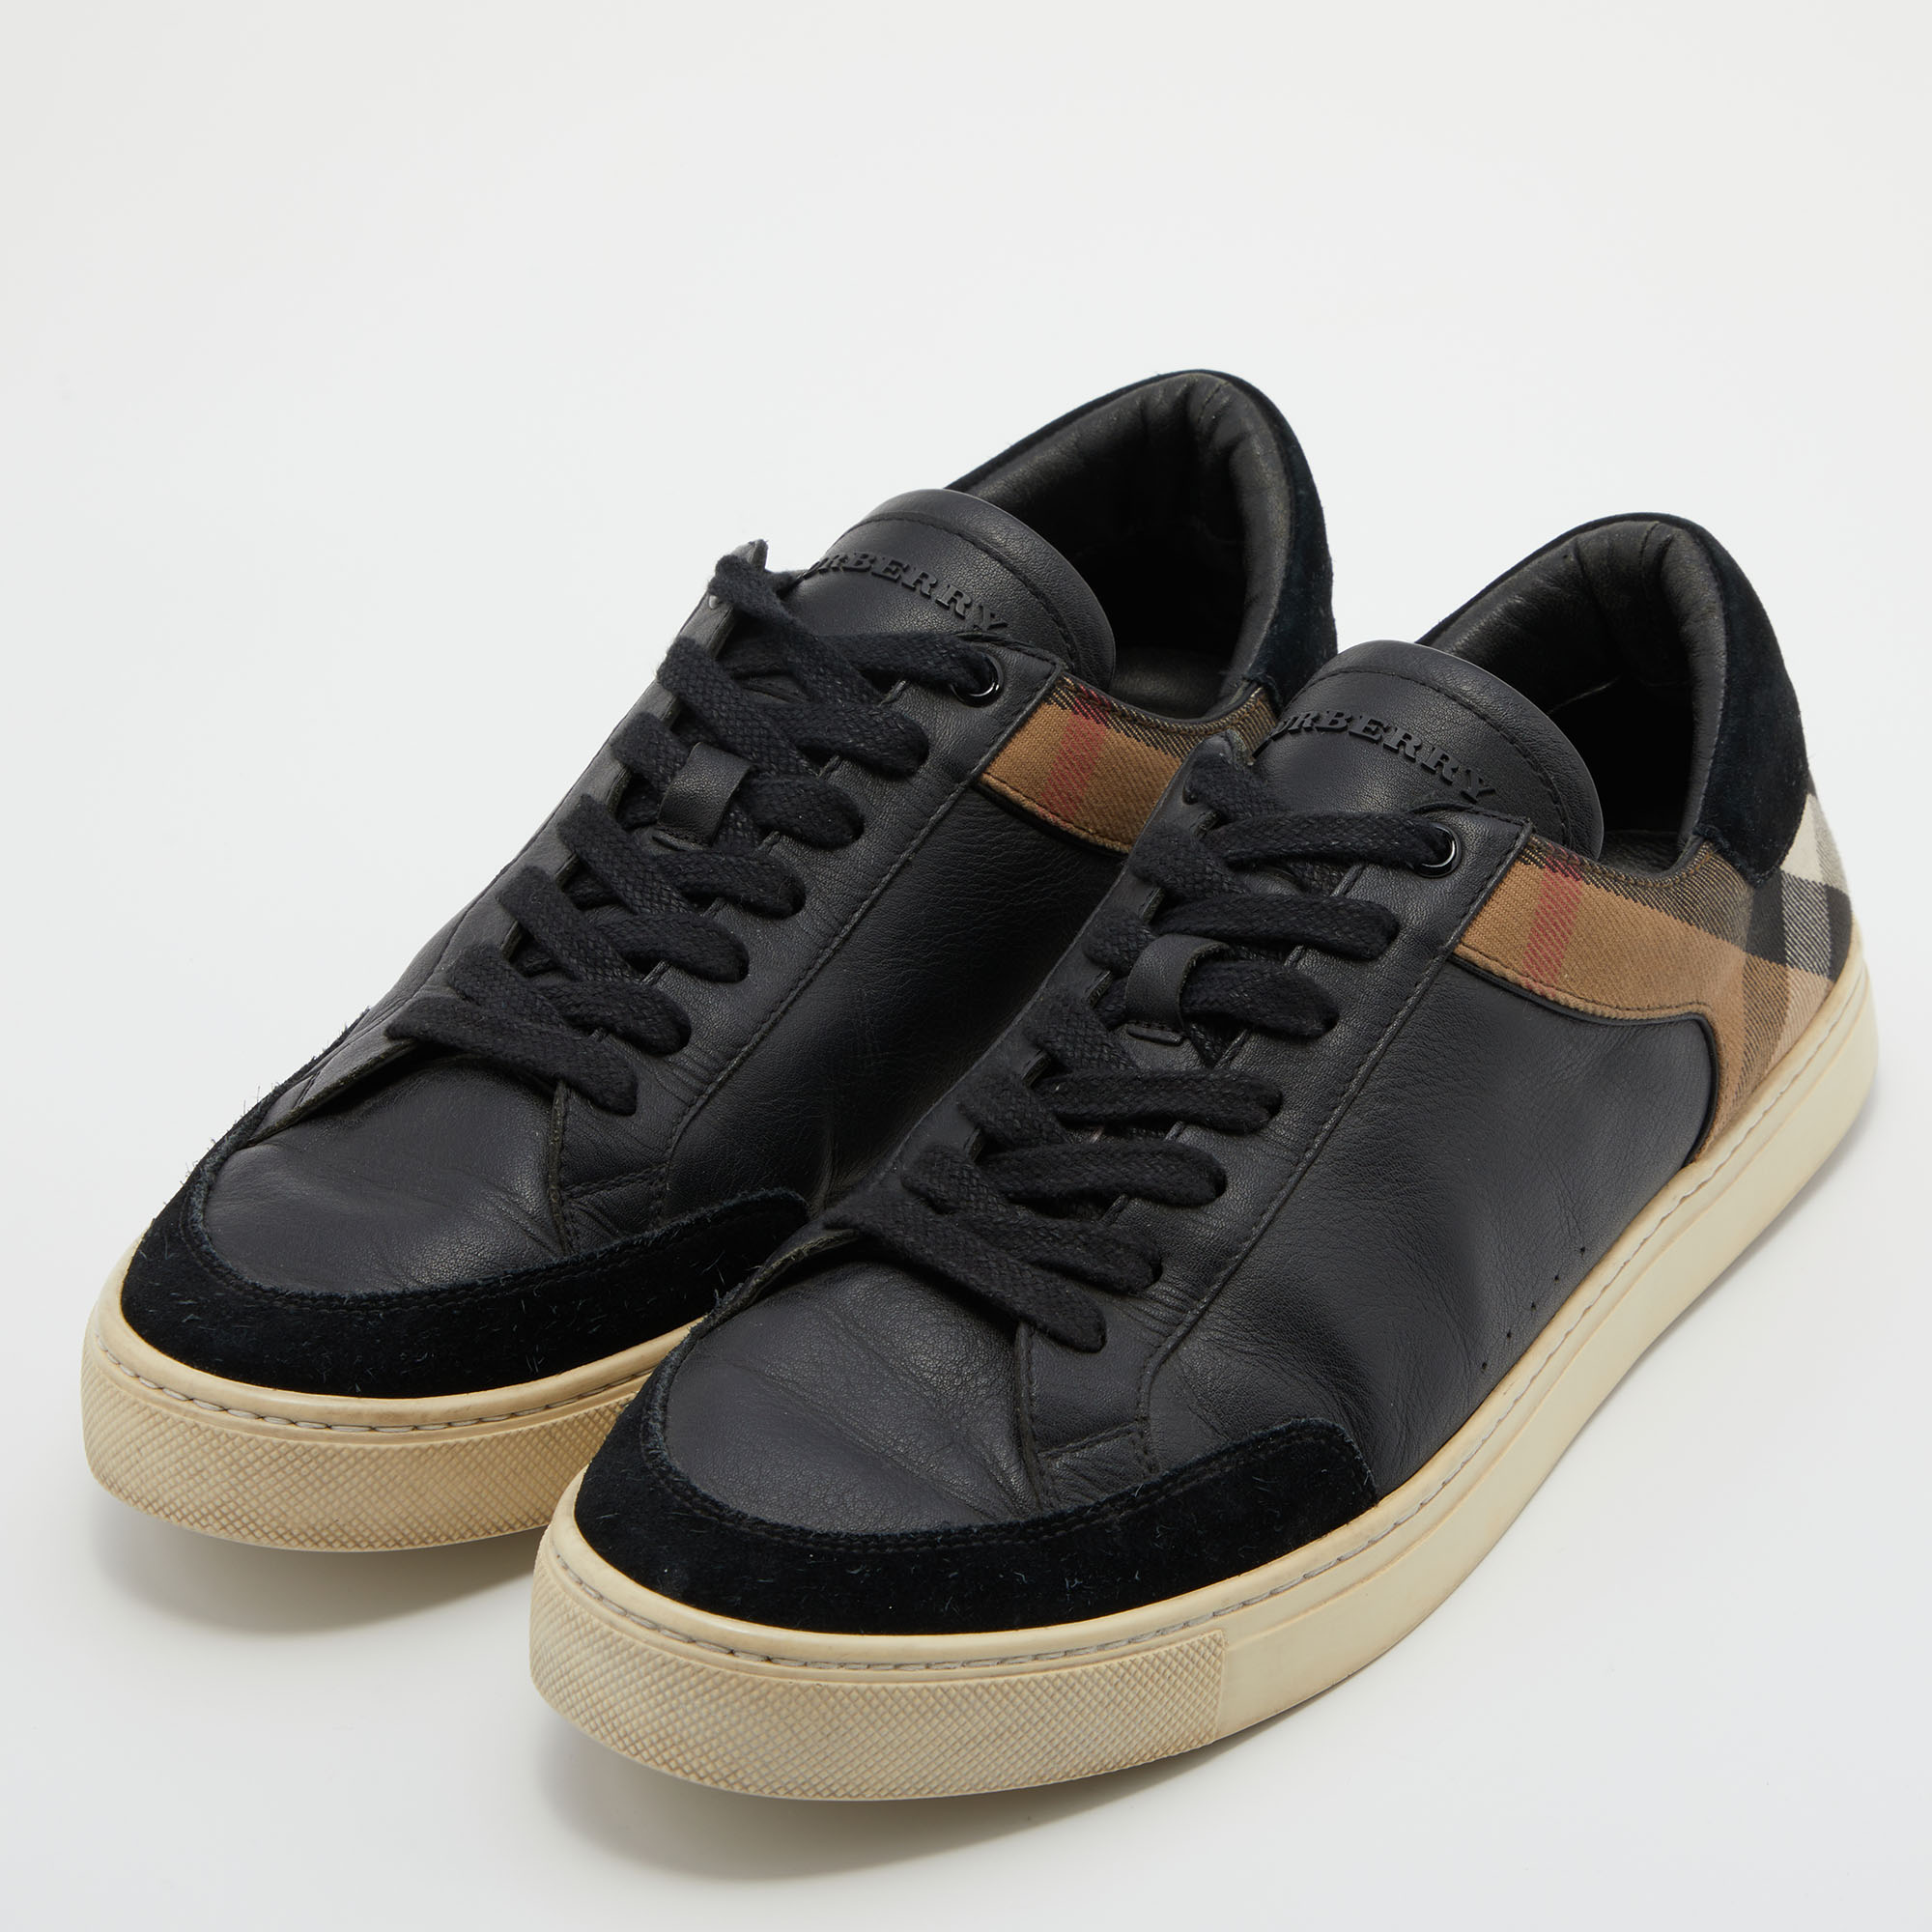 

Burberry Black Leather, Suede and Nova Check Canvas Low Top Sneakers Size